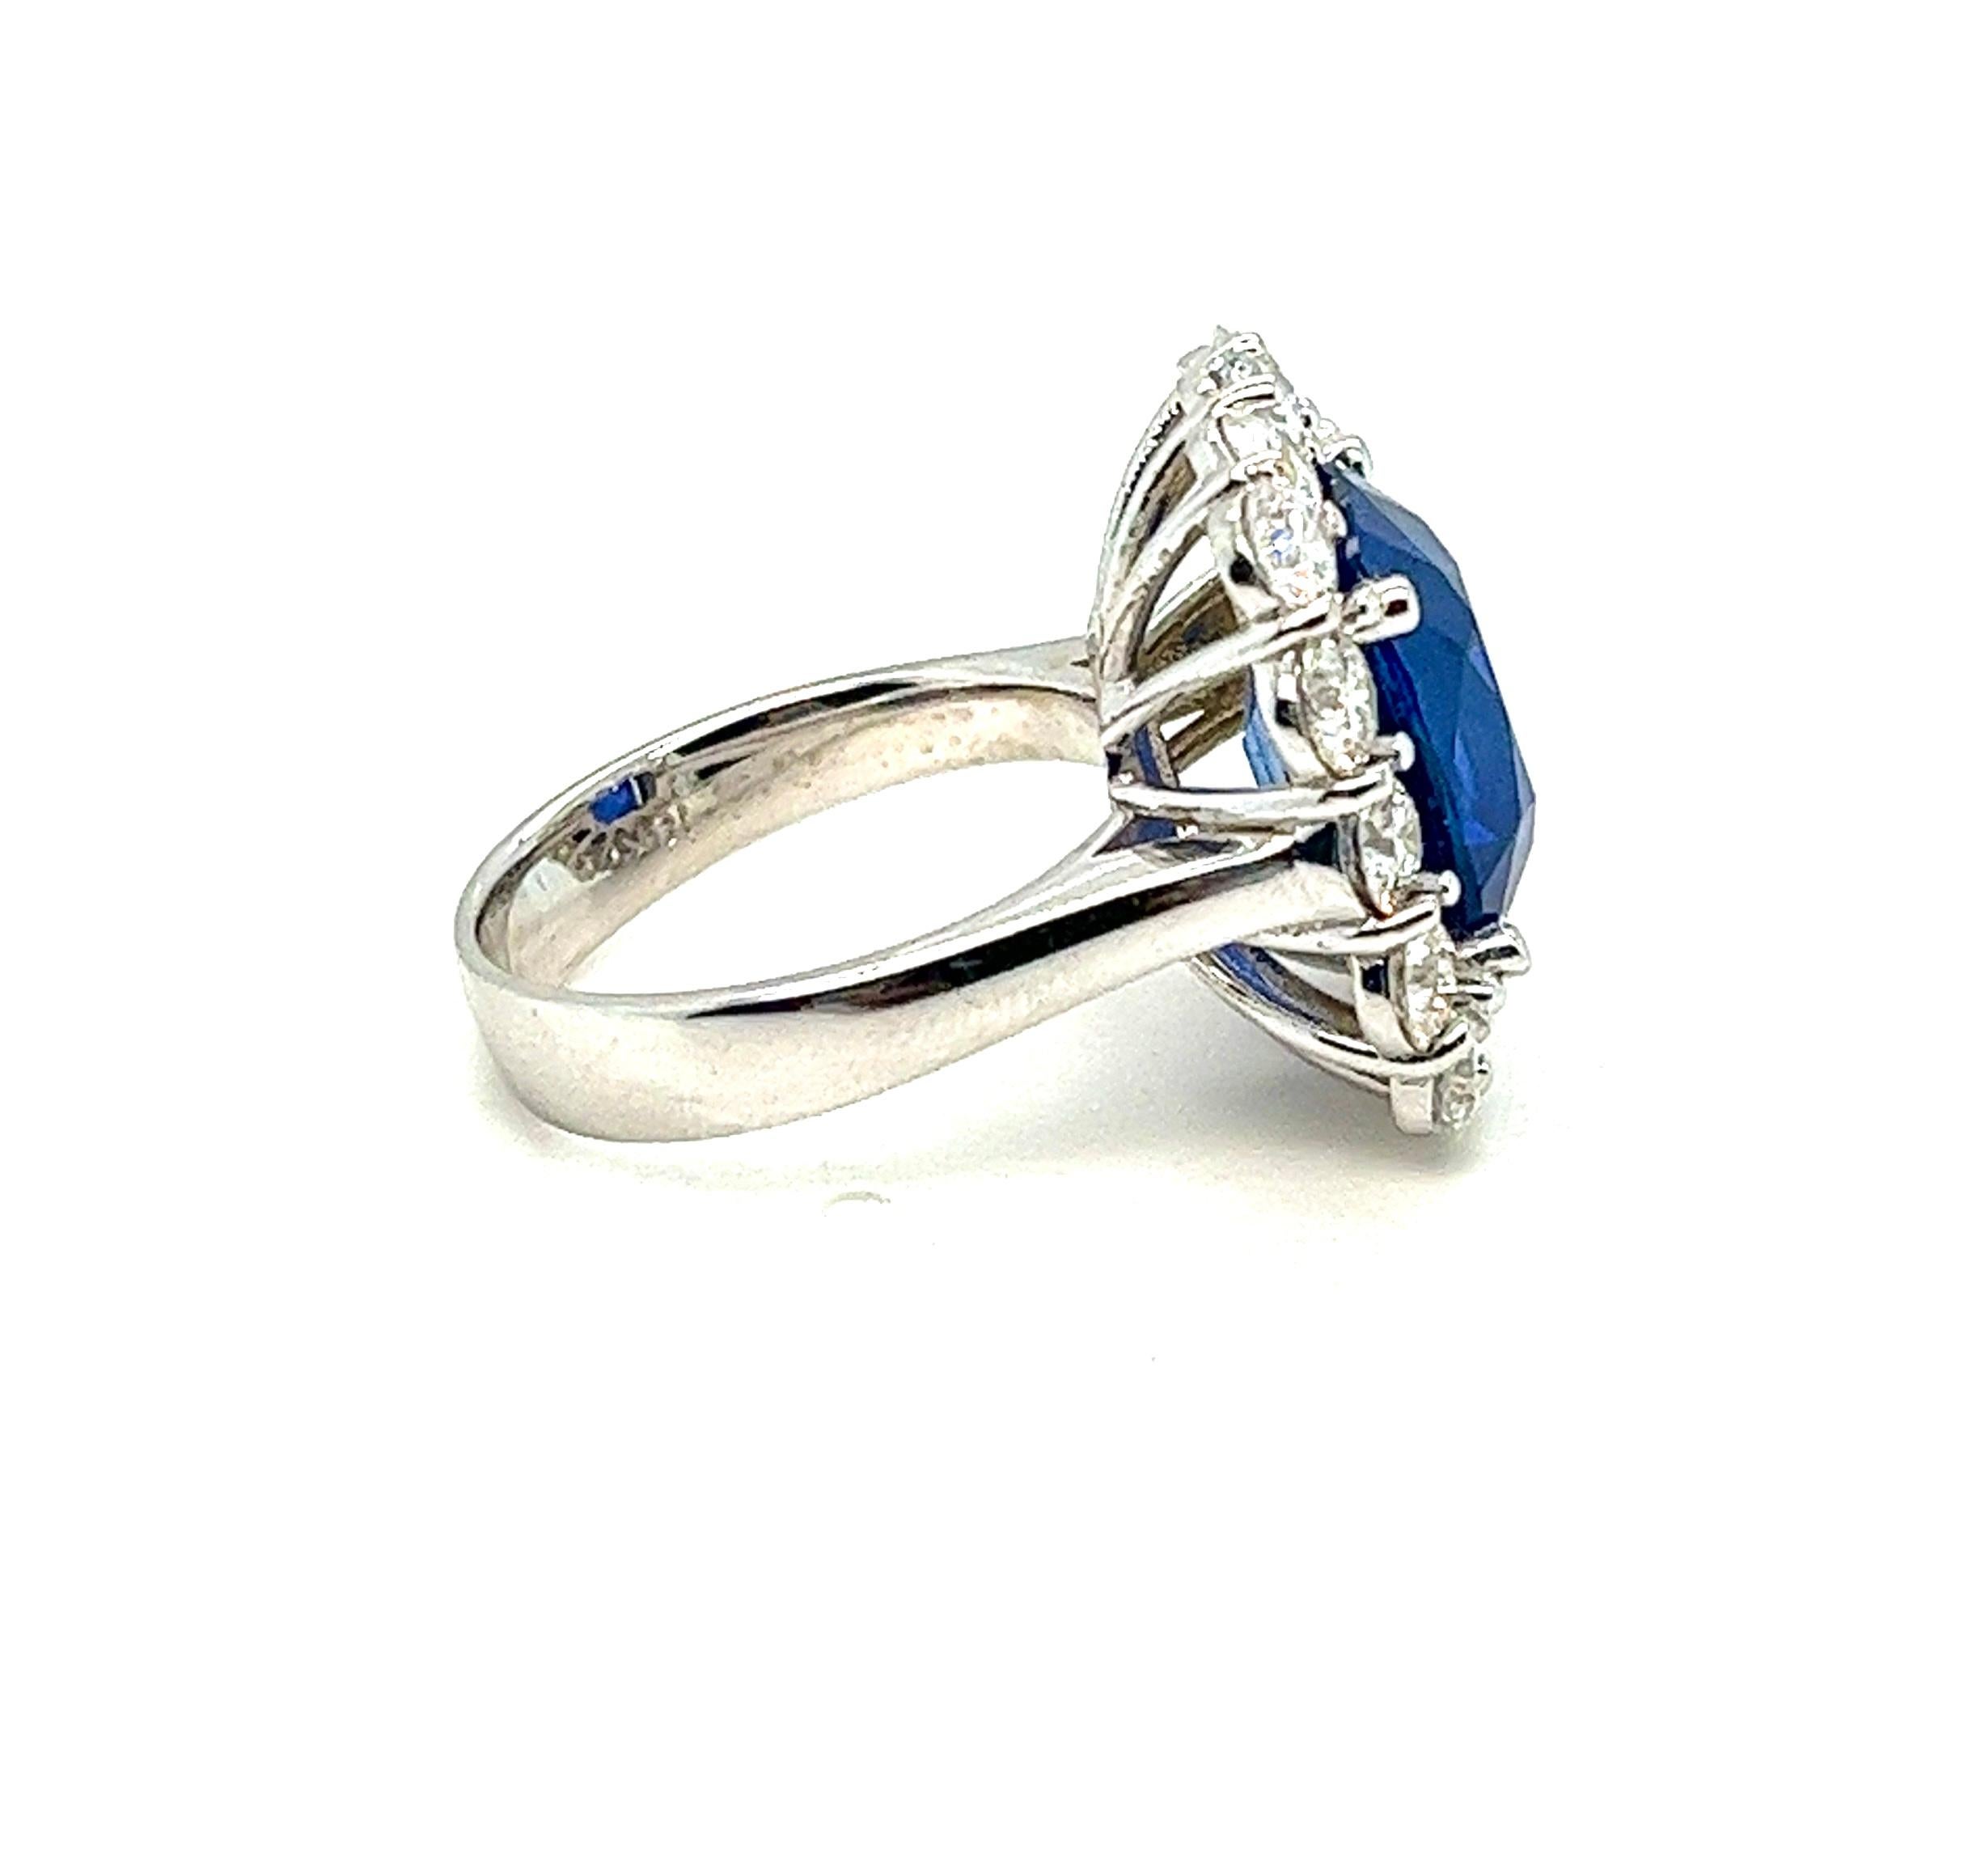 Contemporary Exquisite 11.87 Carat Natural Sapphire and Diamond Cocktail Ring For Sale